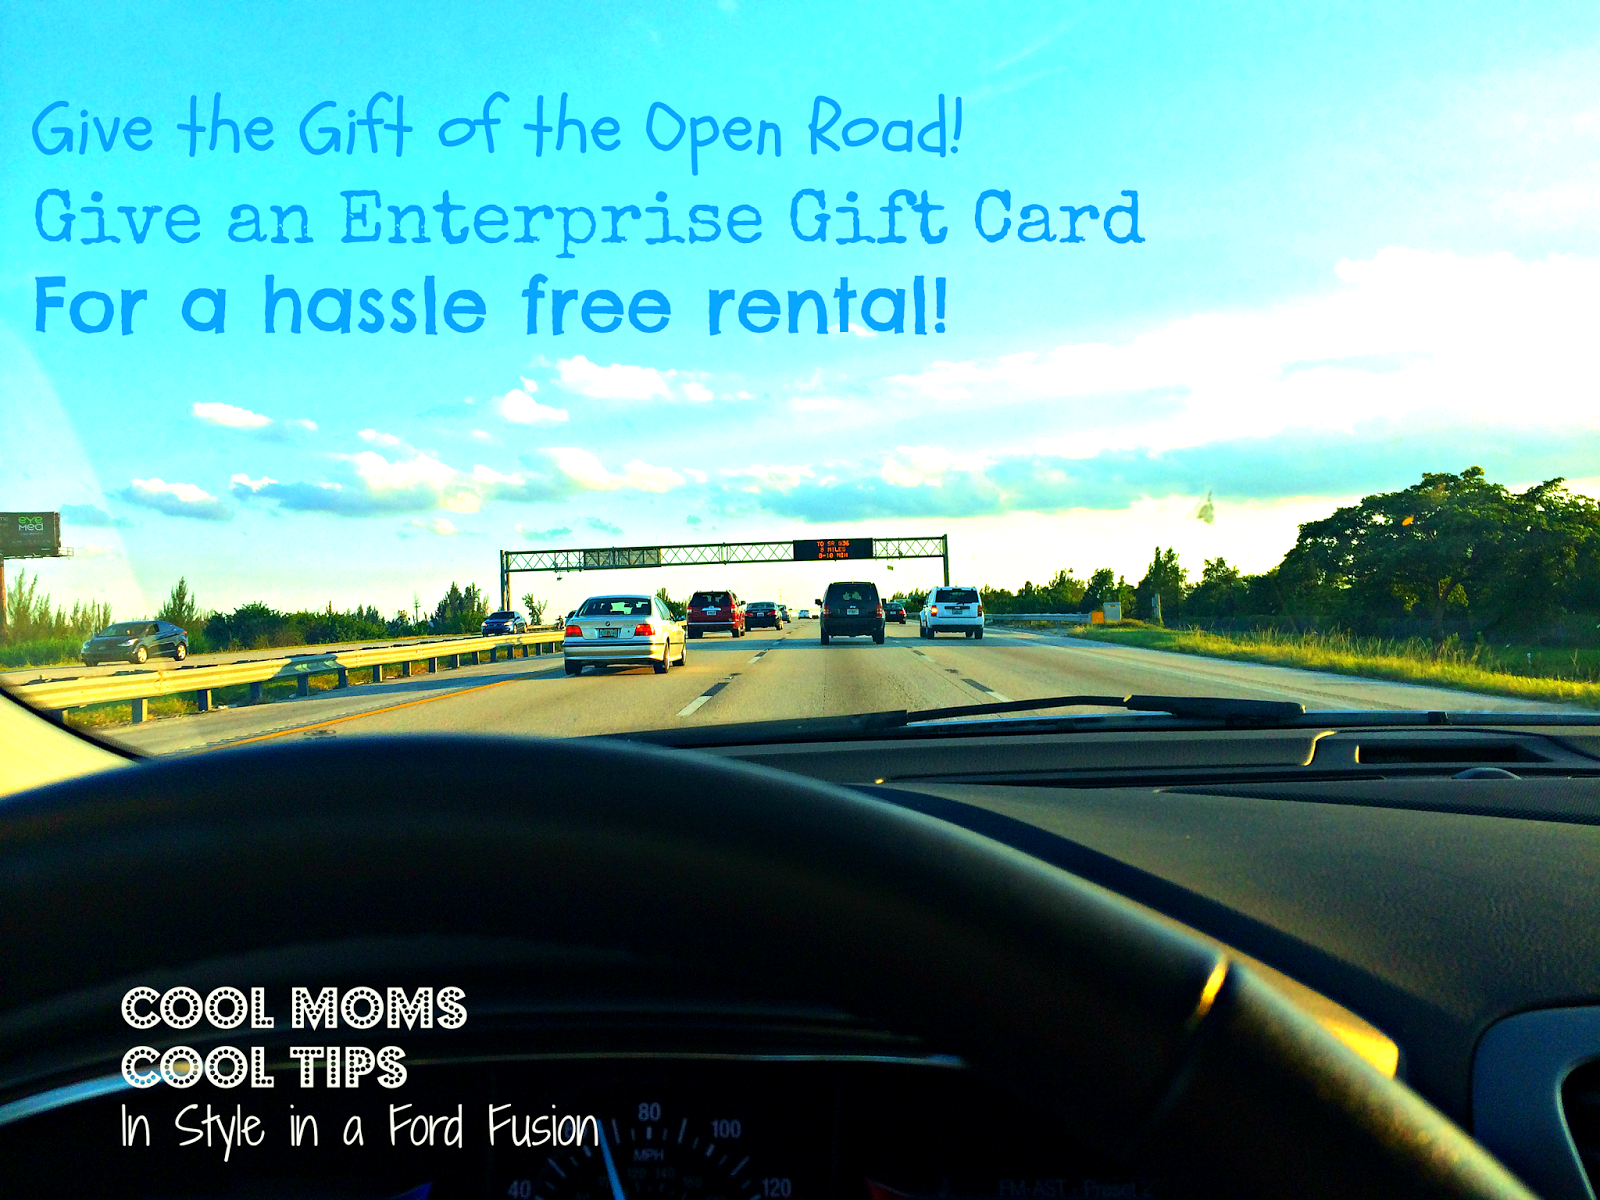 cool moms cool tips the open road is easy renting and Enterprise car